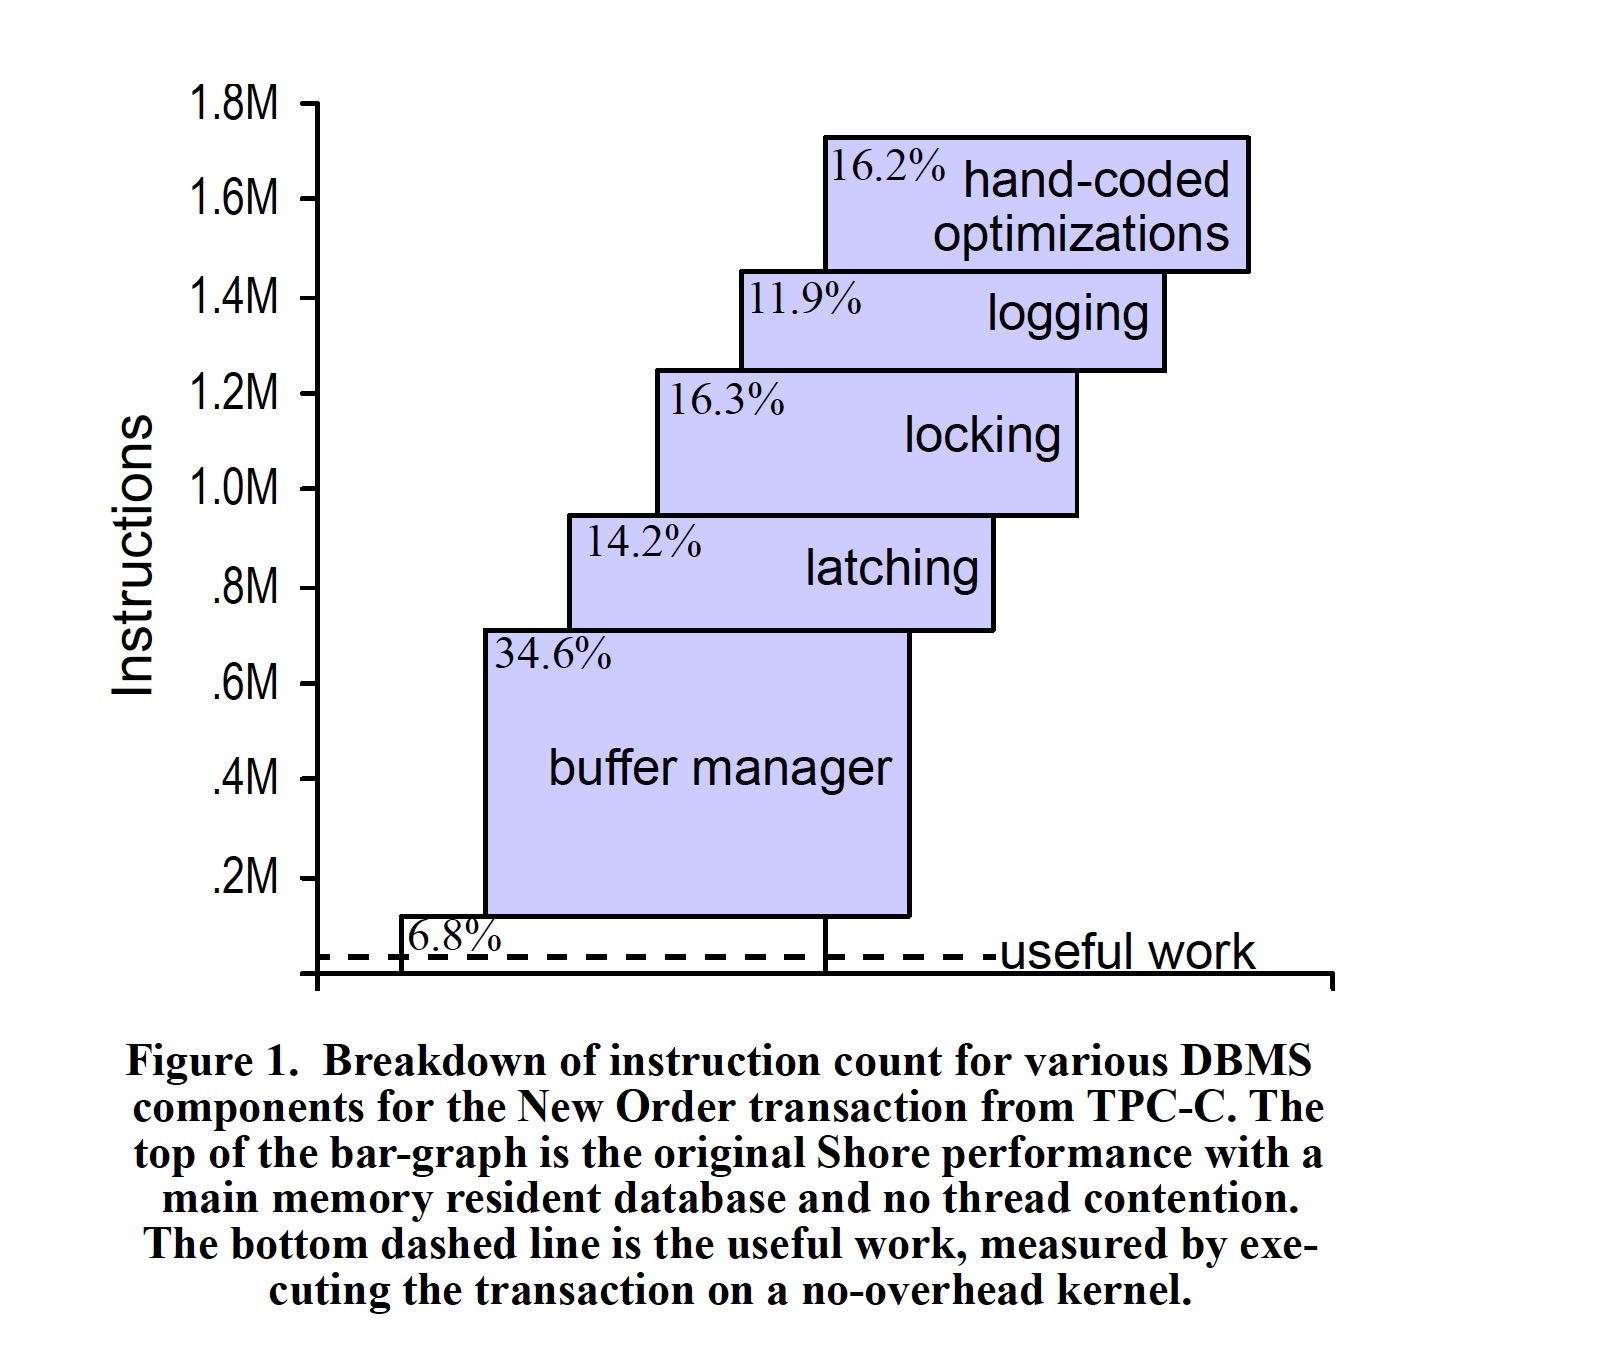 Breakdown of instruction count for various DBMS components for the New Order transaction from TPC-C